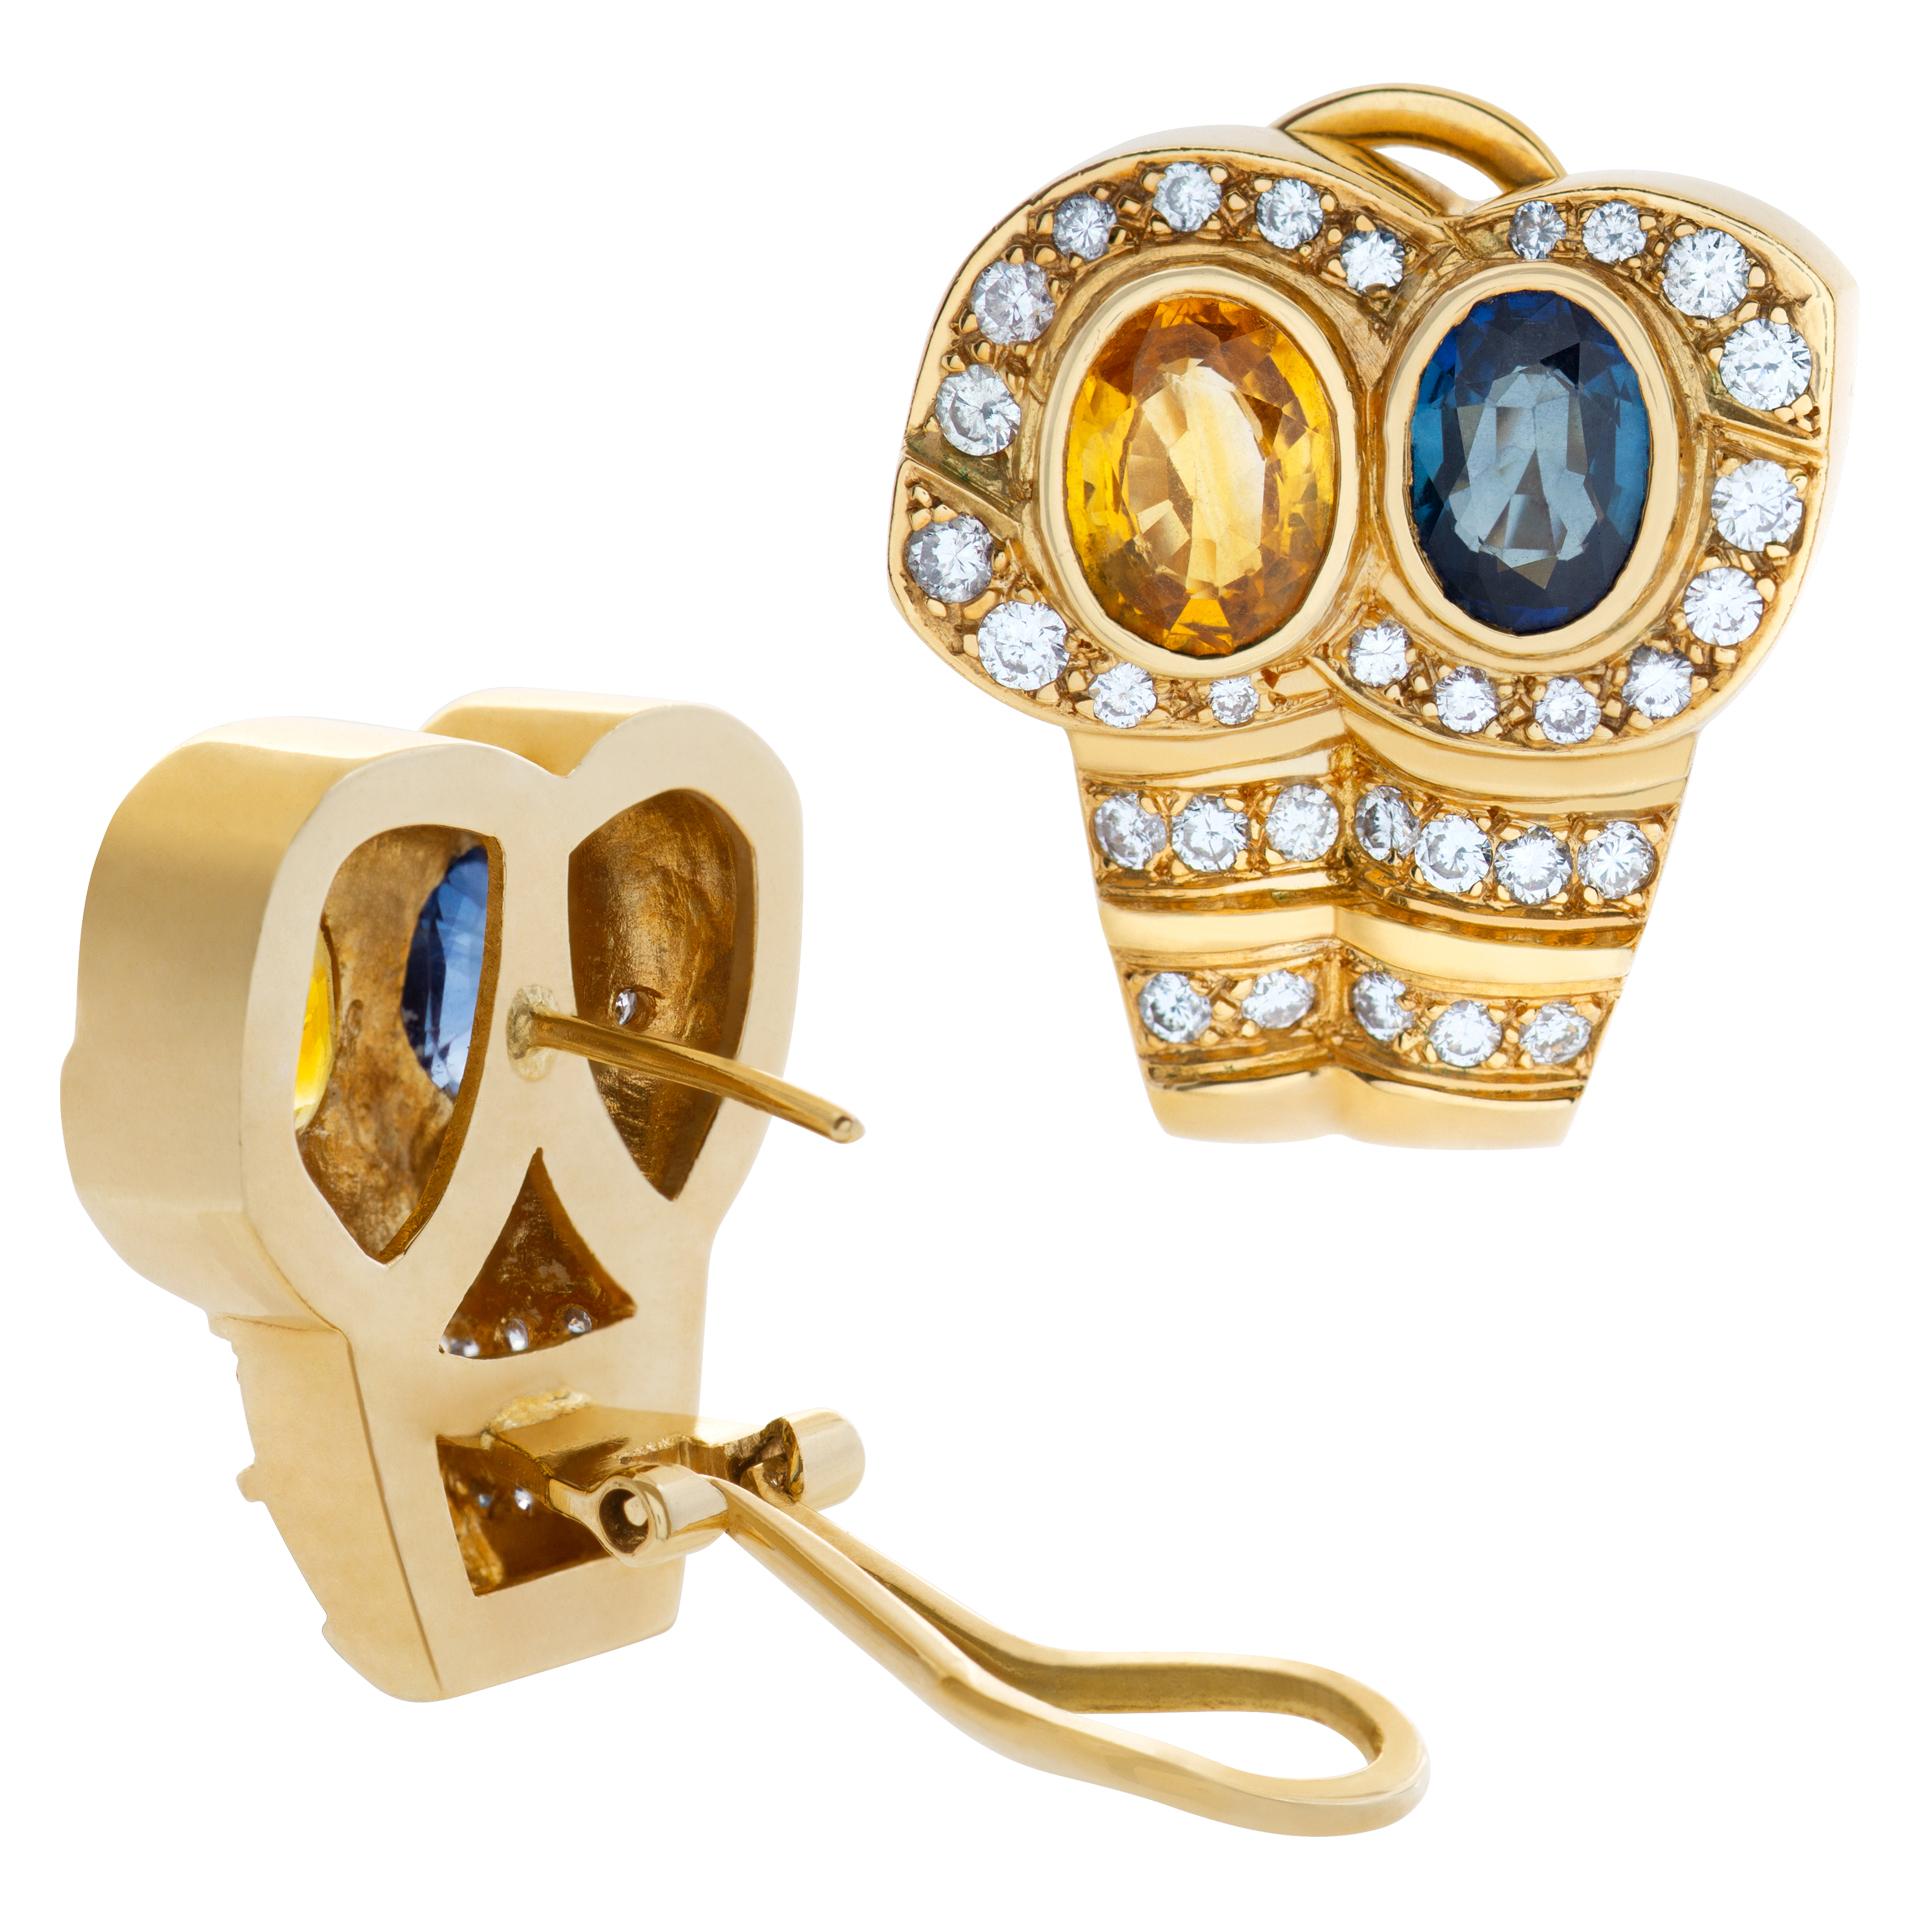 Women's Colorful Ring & Earrings Set, with Brilliant Cut Oval Citrine, Blue Topaz & Roun For Sale